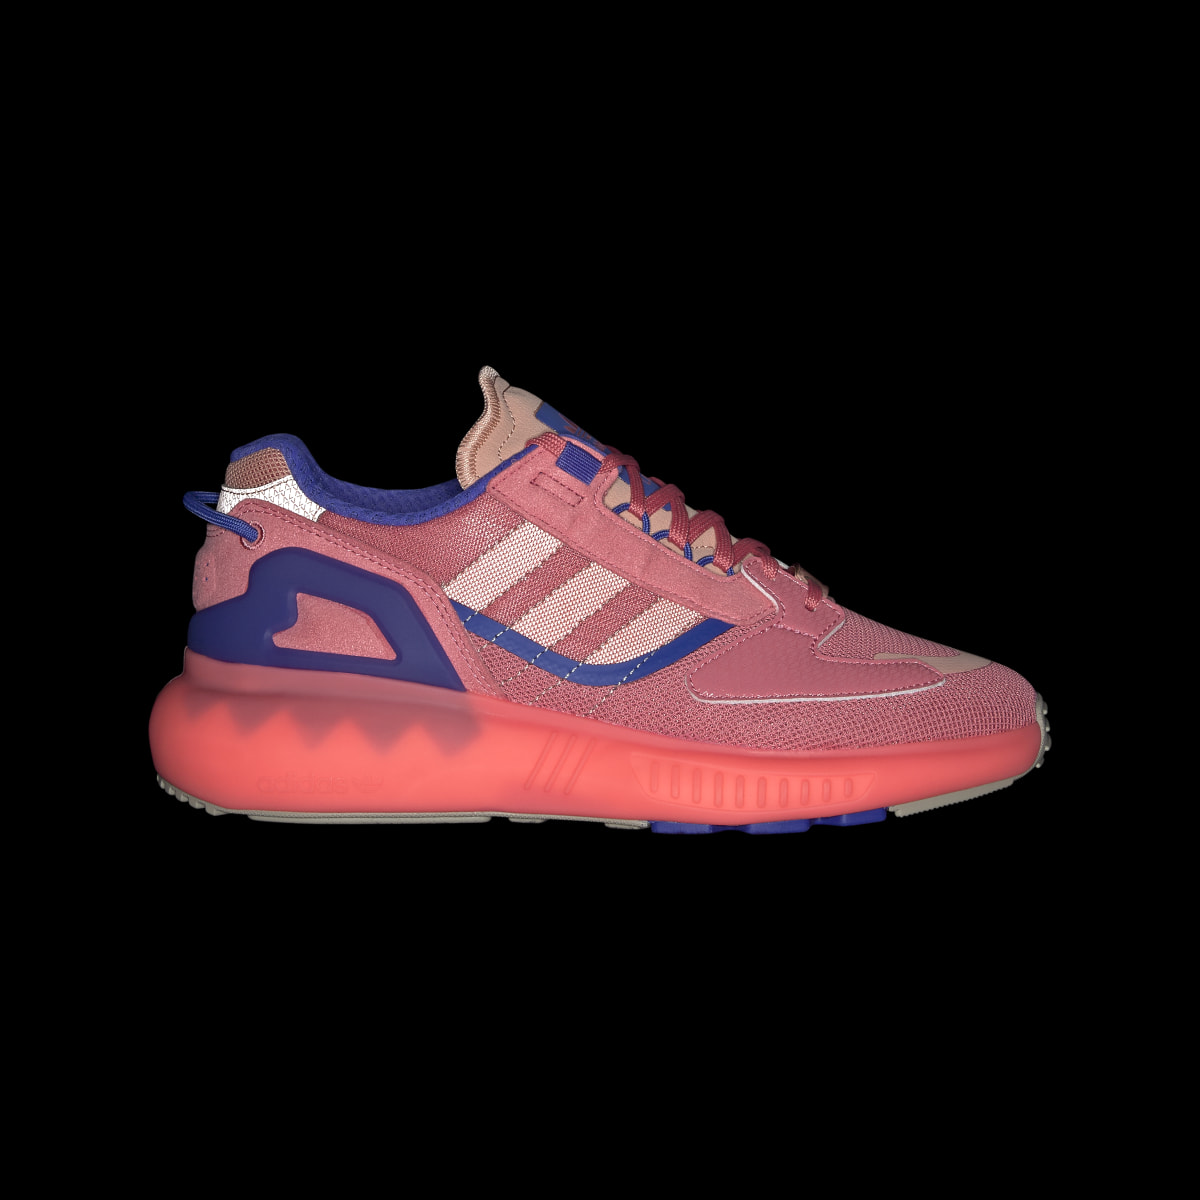 Adidas ZX 5K BOOST Shoes. 5